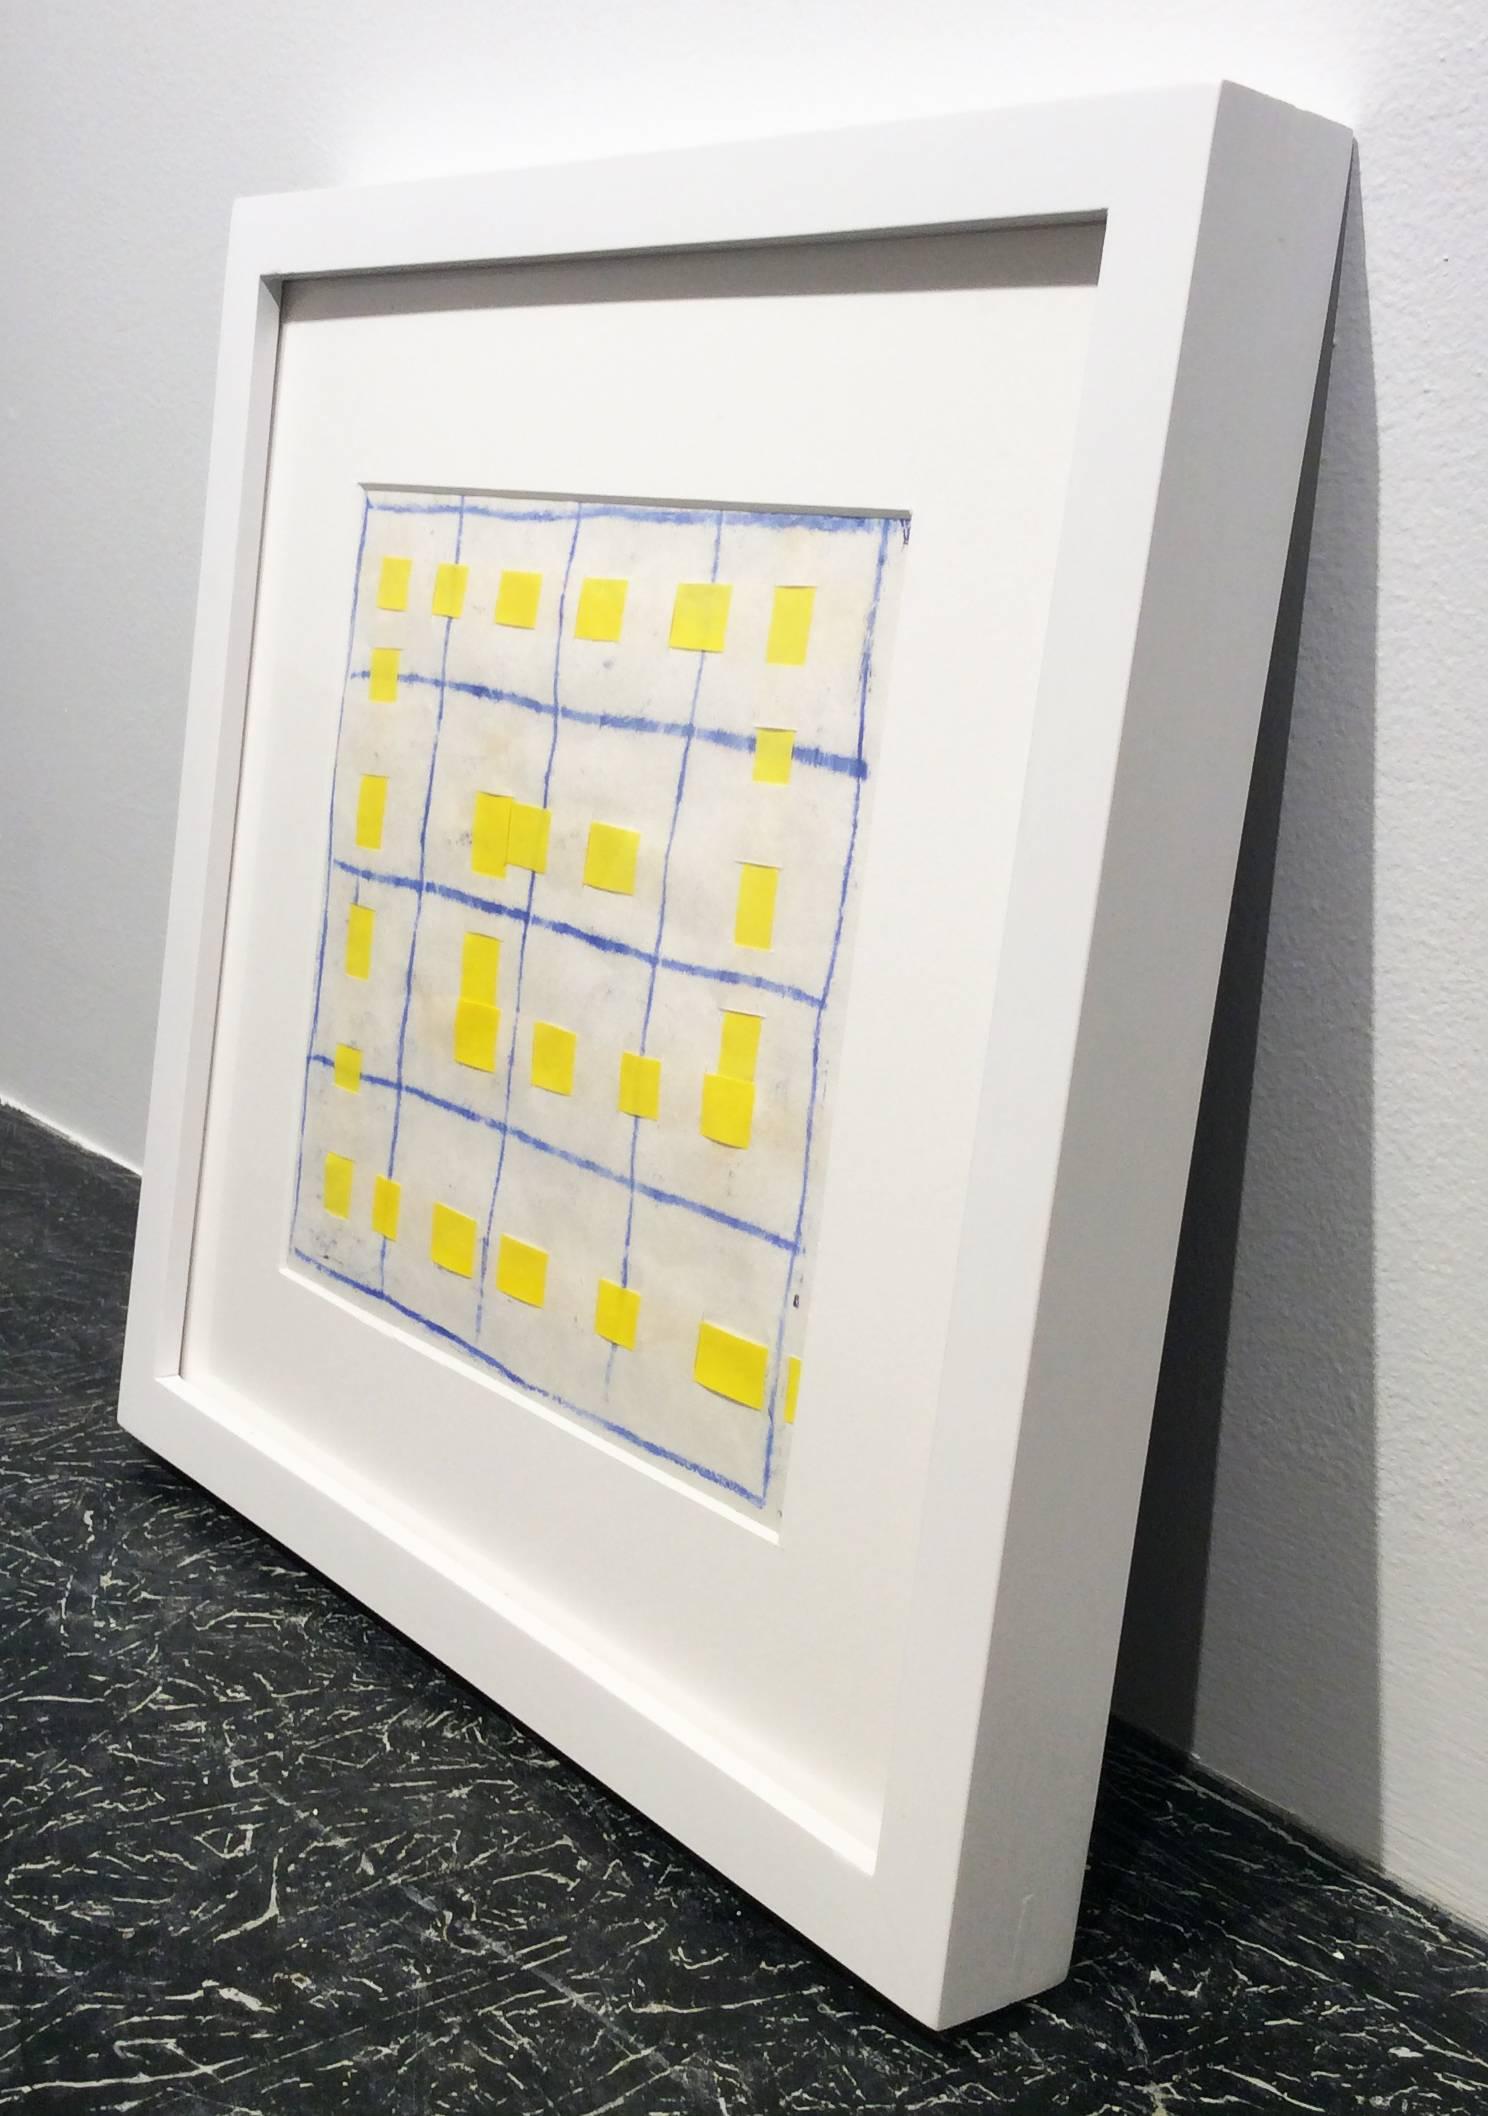 16B: Modern, Abstract Blue, White, & Yellow Grid Pattern Painting in White Frame - Beige Abstract Painting by Donise English